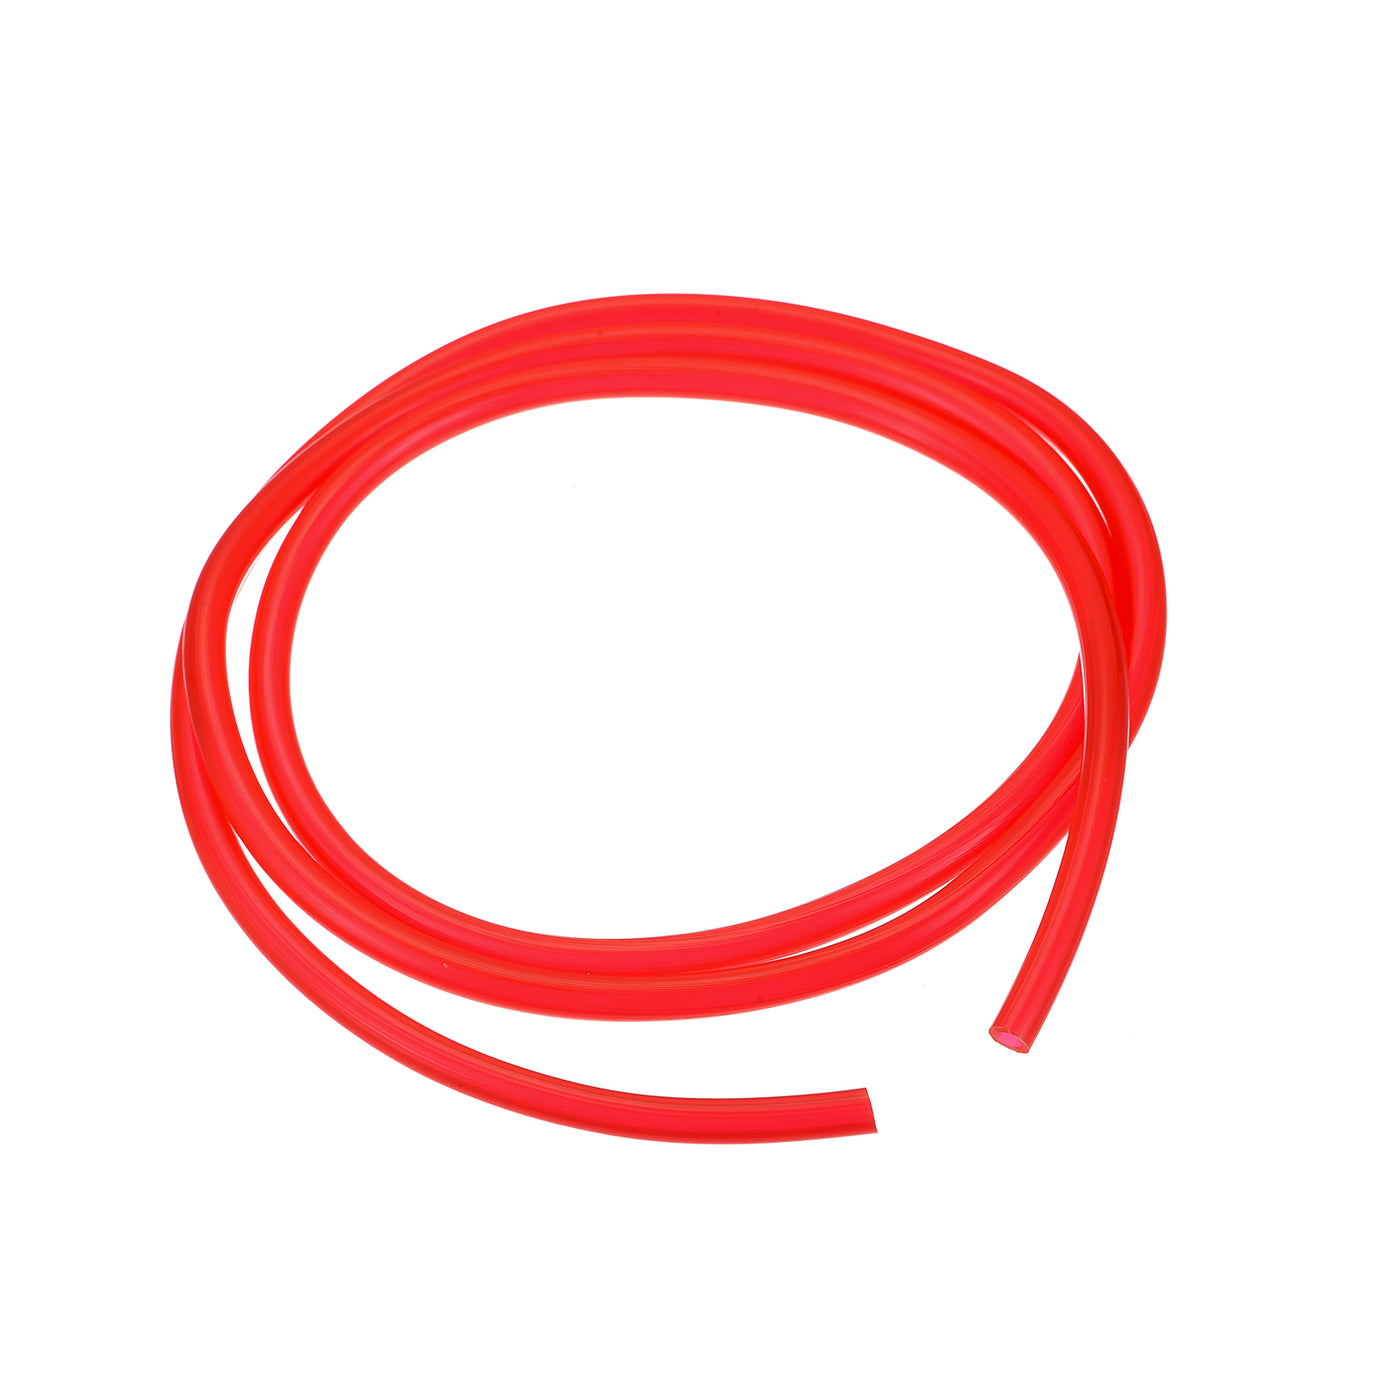 uxcell Uxcell Color Hose Tubing 1/8" ID, 13/64" OD Plastic 1Pcs 3.28 Ft for Pump Transfer, Red